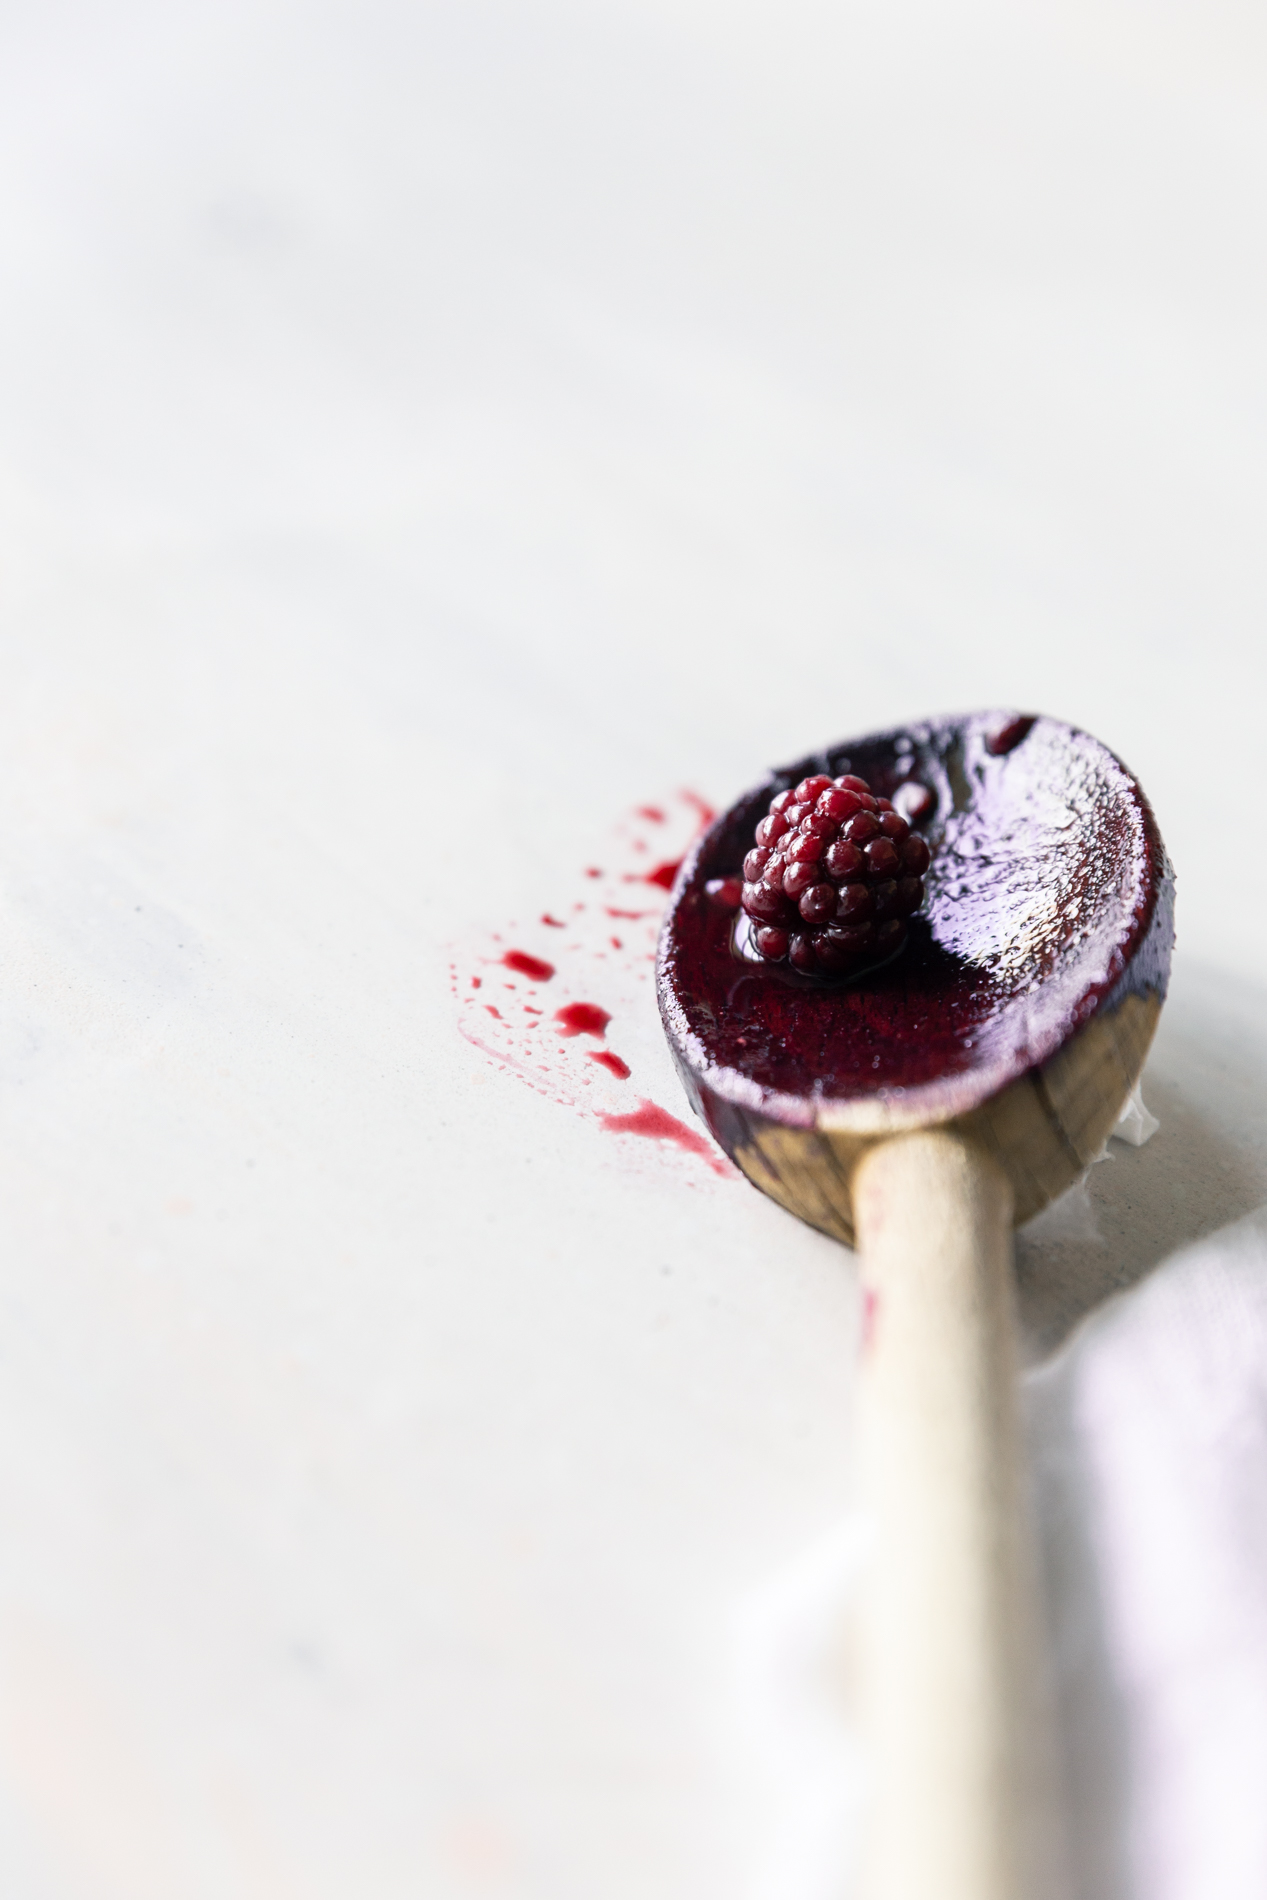 forty-five degree angled view of a wooden spoon with blackberry juices on it and a single small blackberry.